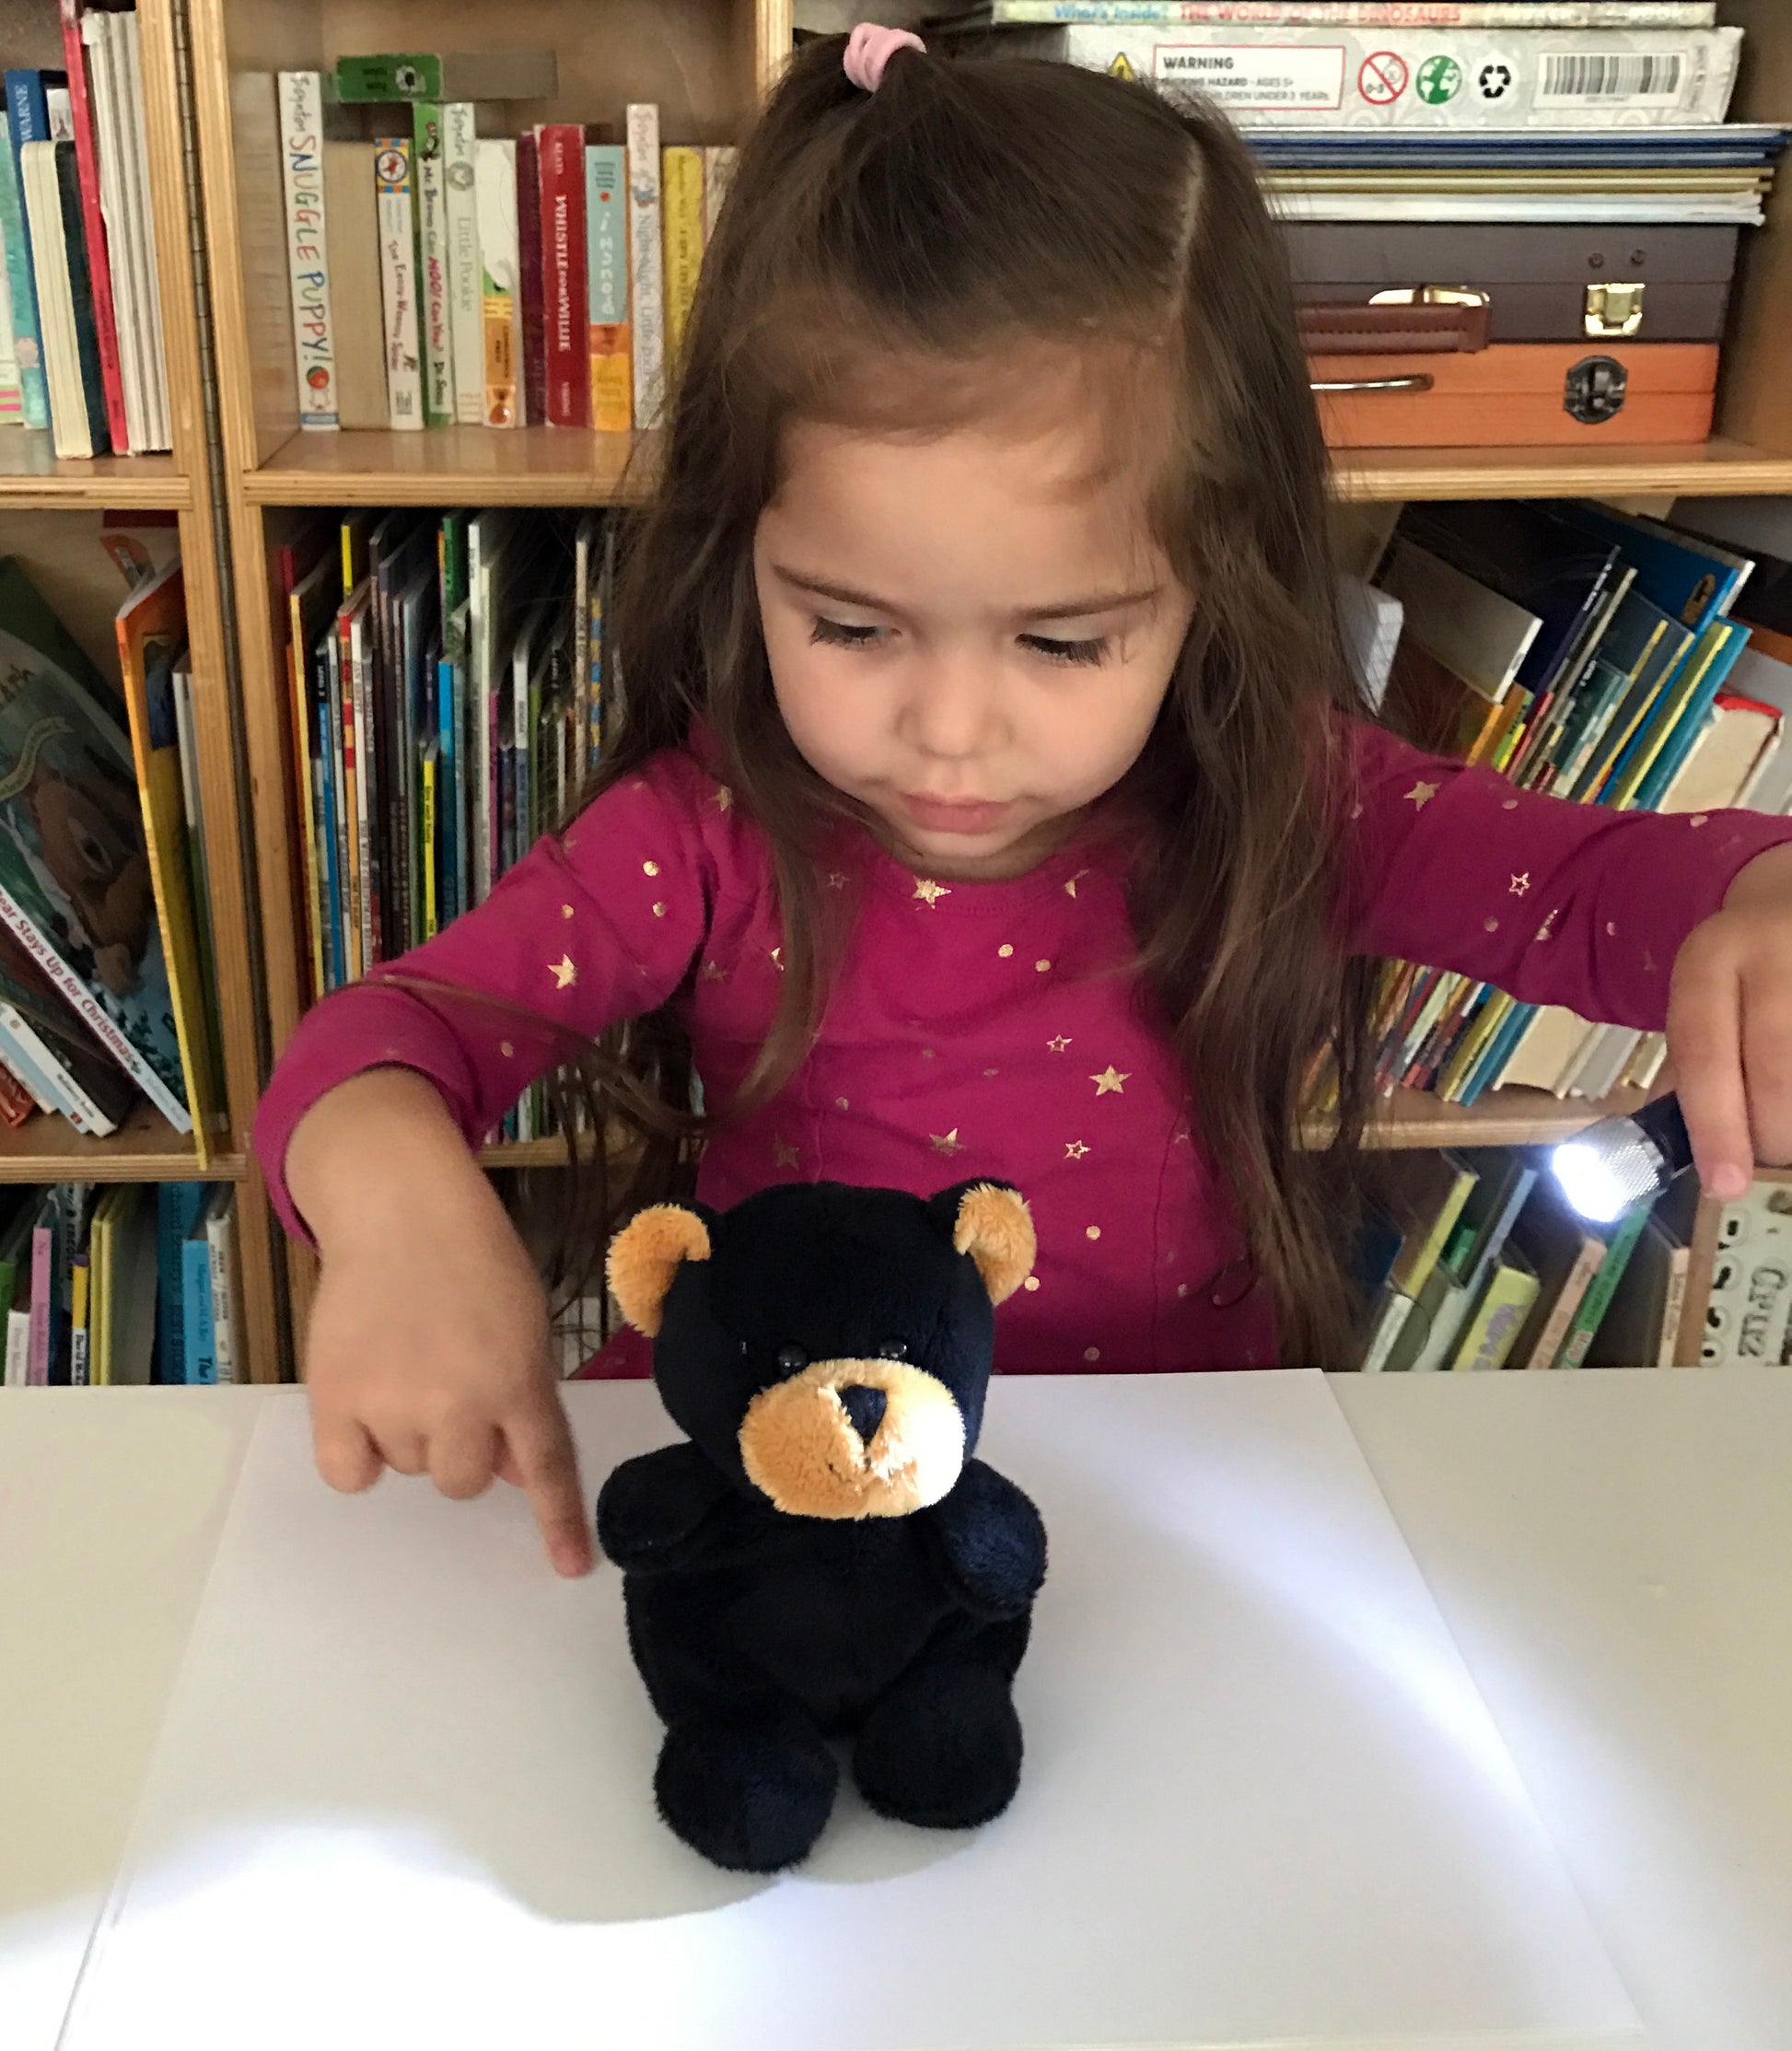 bear shadow experiment for kids